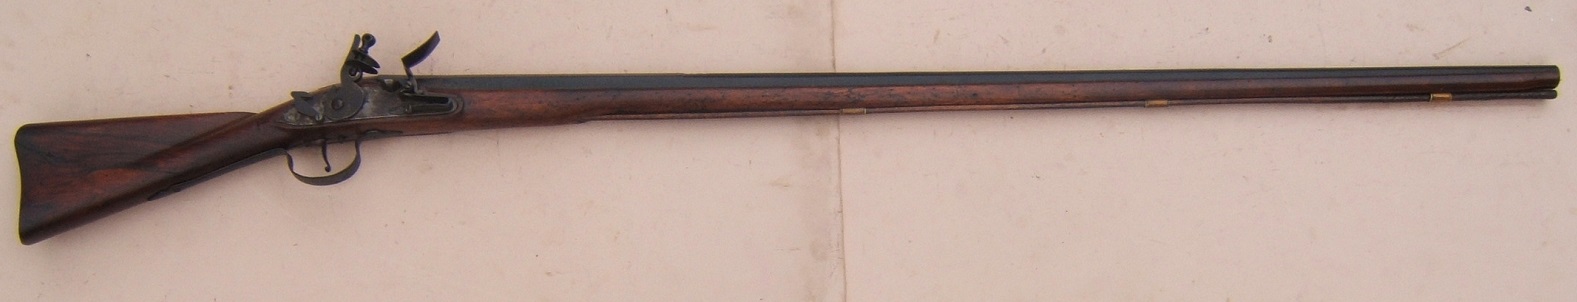  A VERY RARE & EARLY COLONIAL NEW ENGLAND AMERICAN DOGLOCK MUSKET/LONG-FOWLER, ca. 1680 view 1